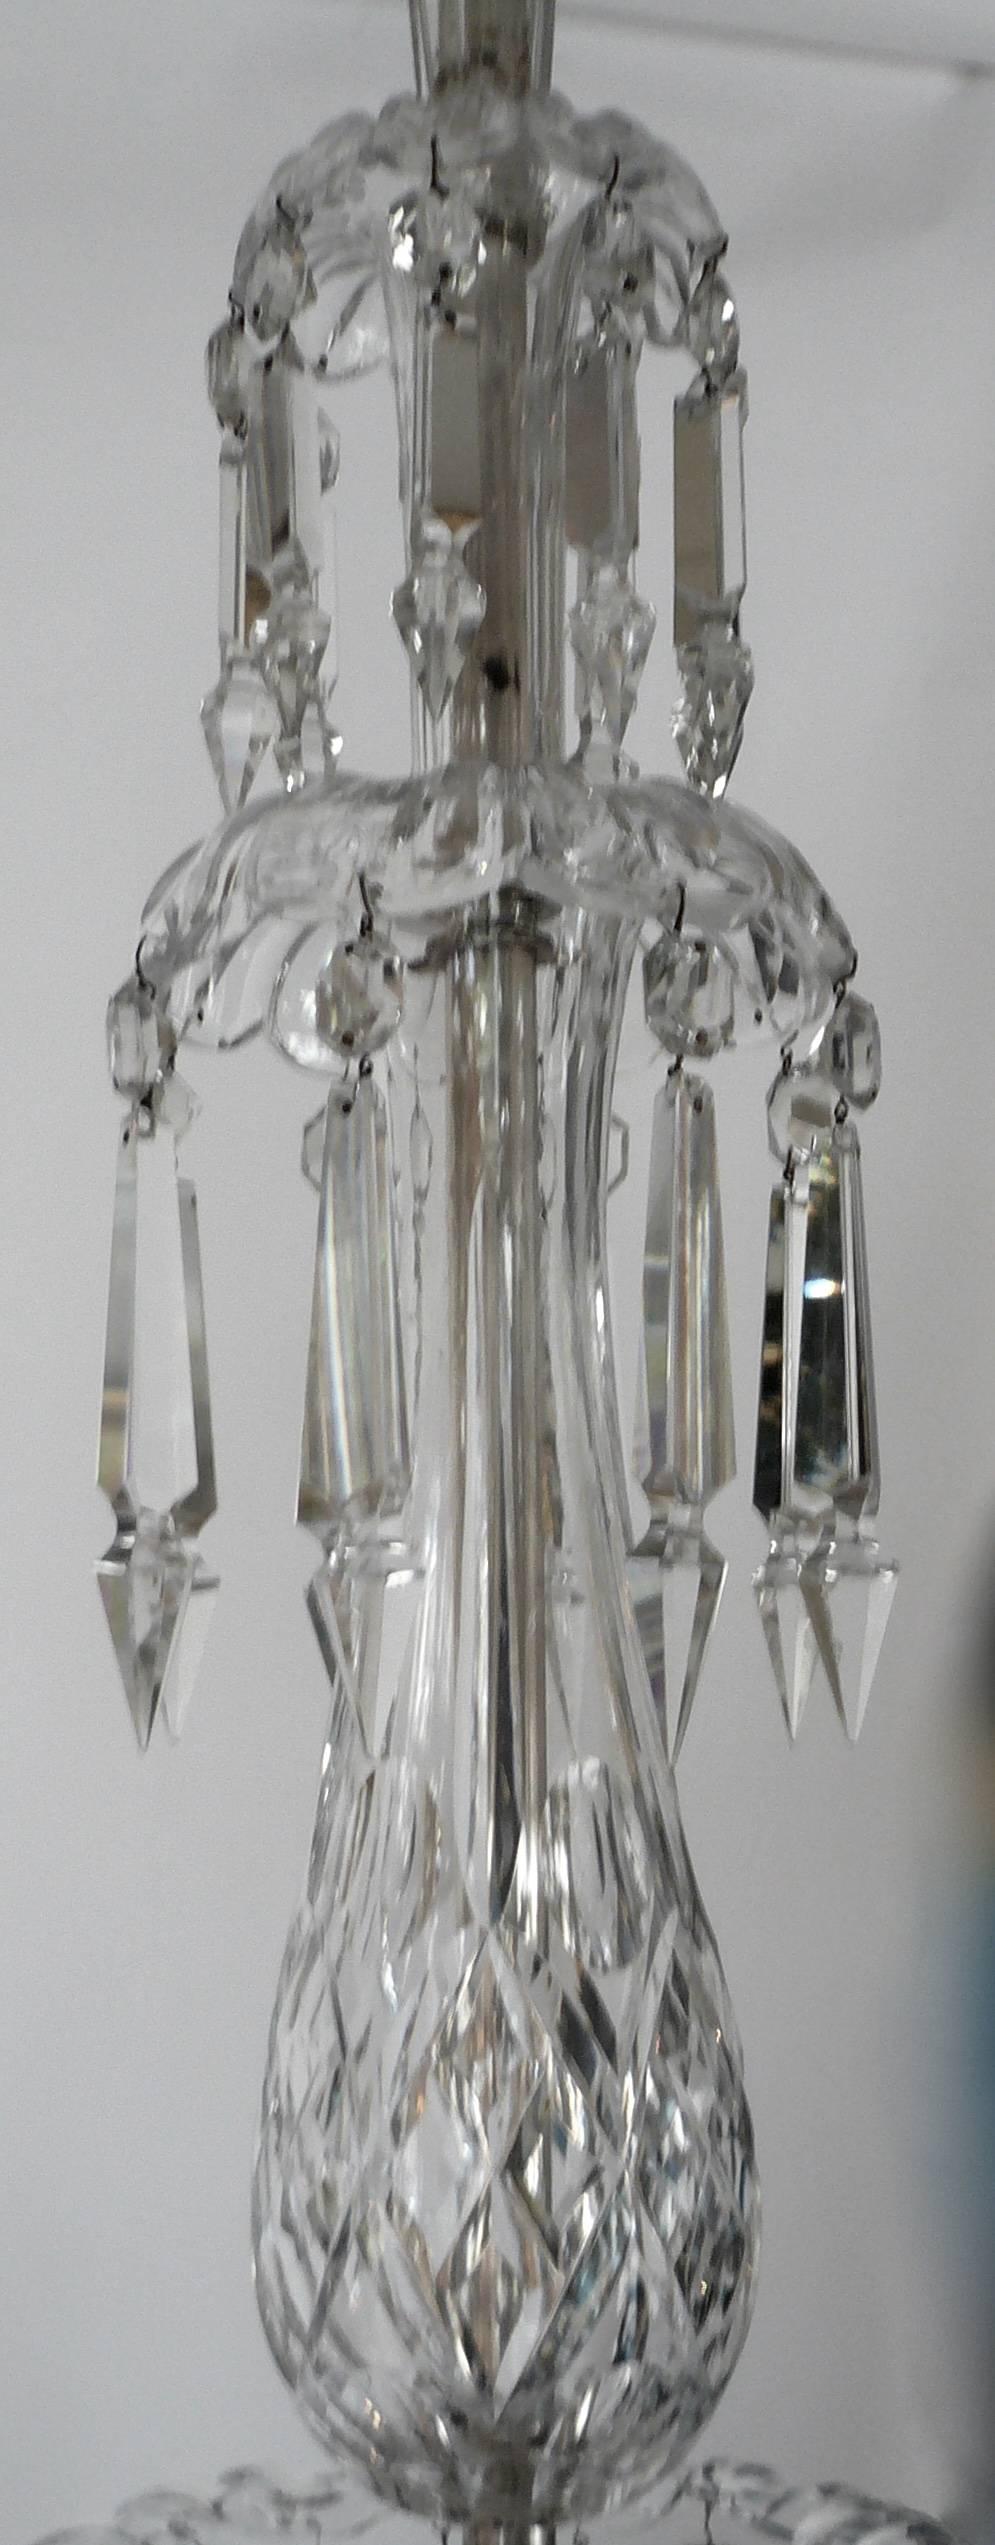 This mid-19th century five-light cut crystal chandelier with silvered fittings is signed by its maker, F&C Osler. Originally gas powered, it has been newly electrified, and is ready for use.